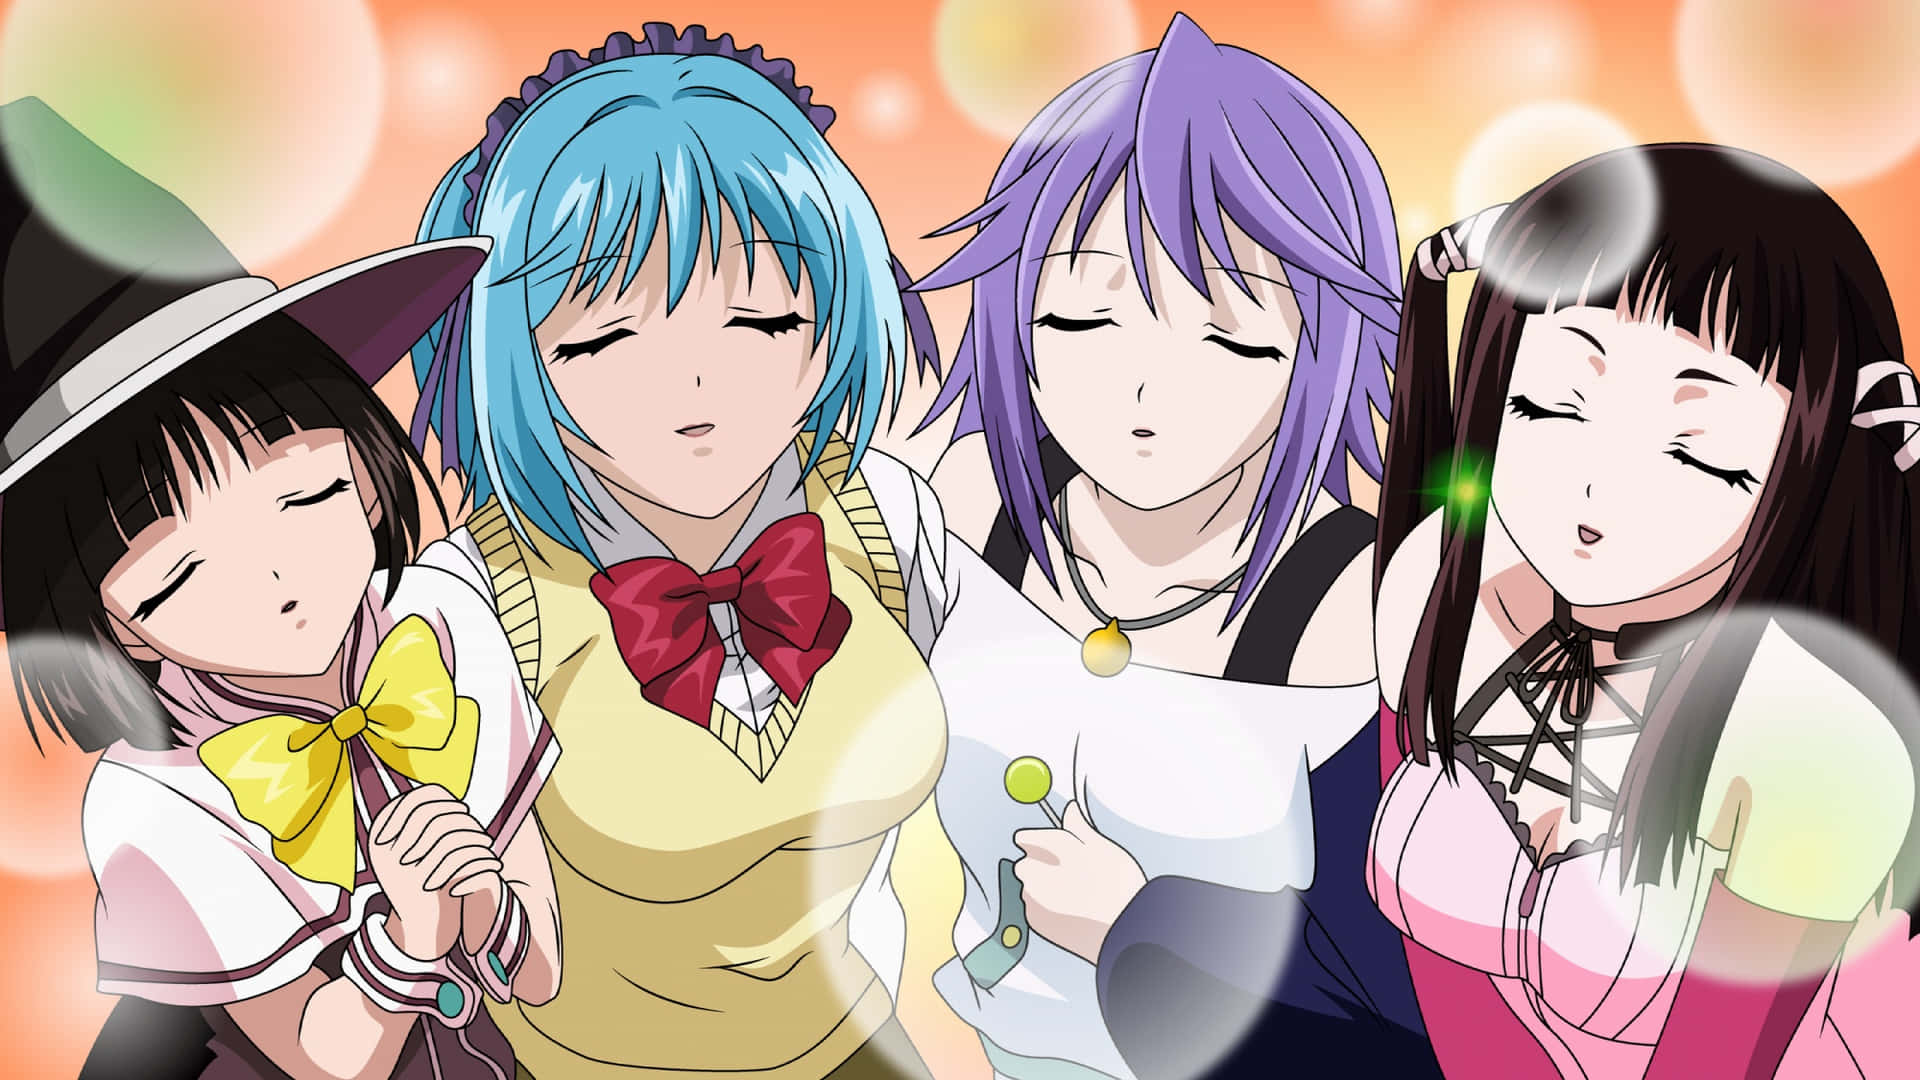 A Group Of Anime Girls With Bubbles In Their Hair Wallpaper